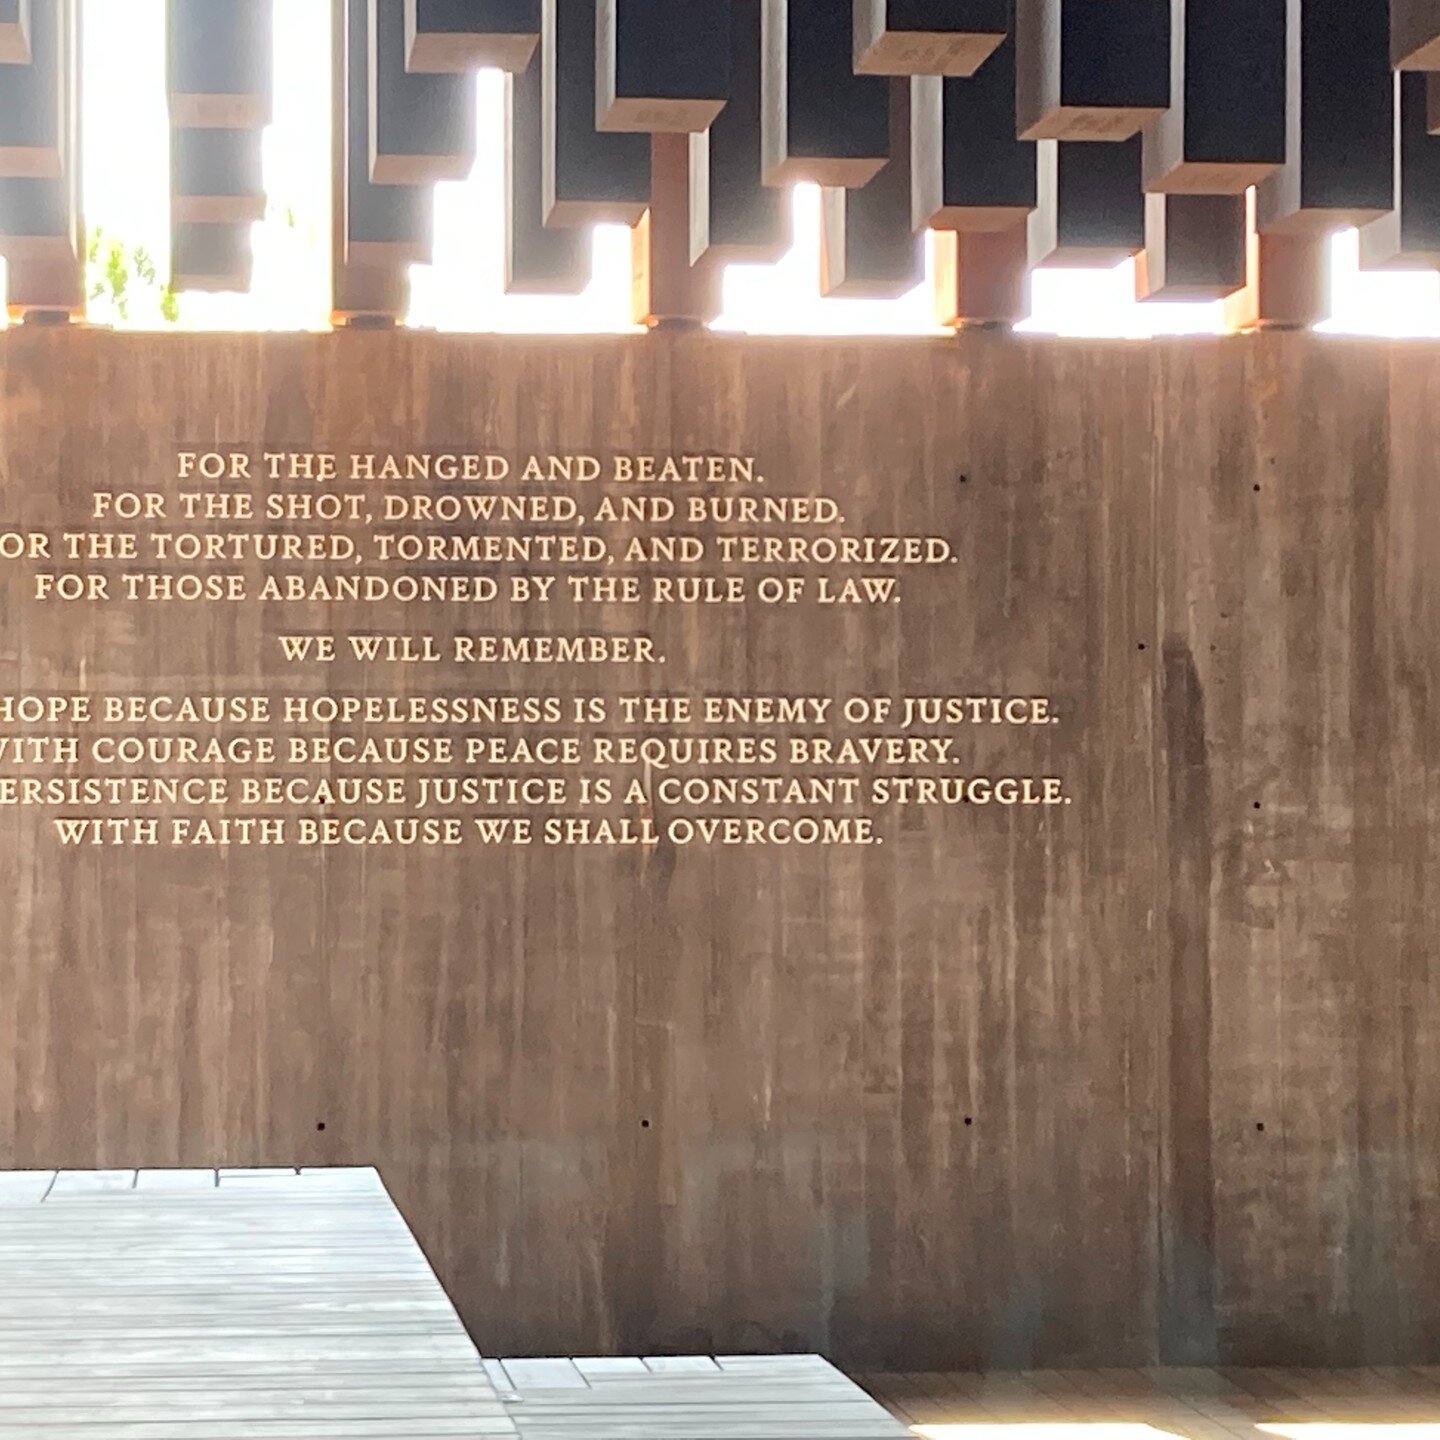 At the &ldquo;National Memorial to Peace and Justice&quot; in Montgomery, Stevenson managed to portray our darkest moments while simultaneously shedding light on our path forward.